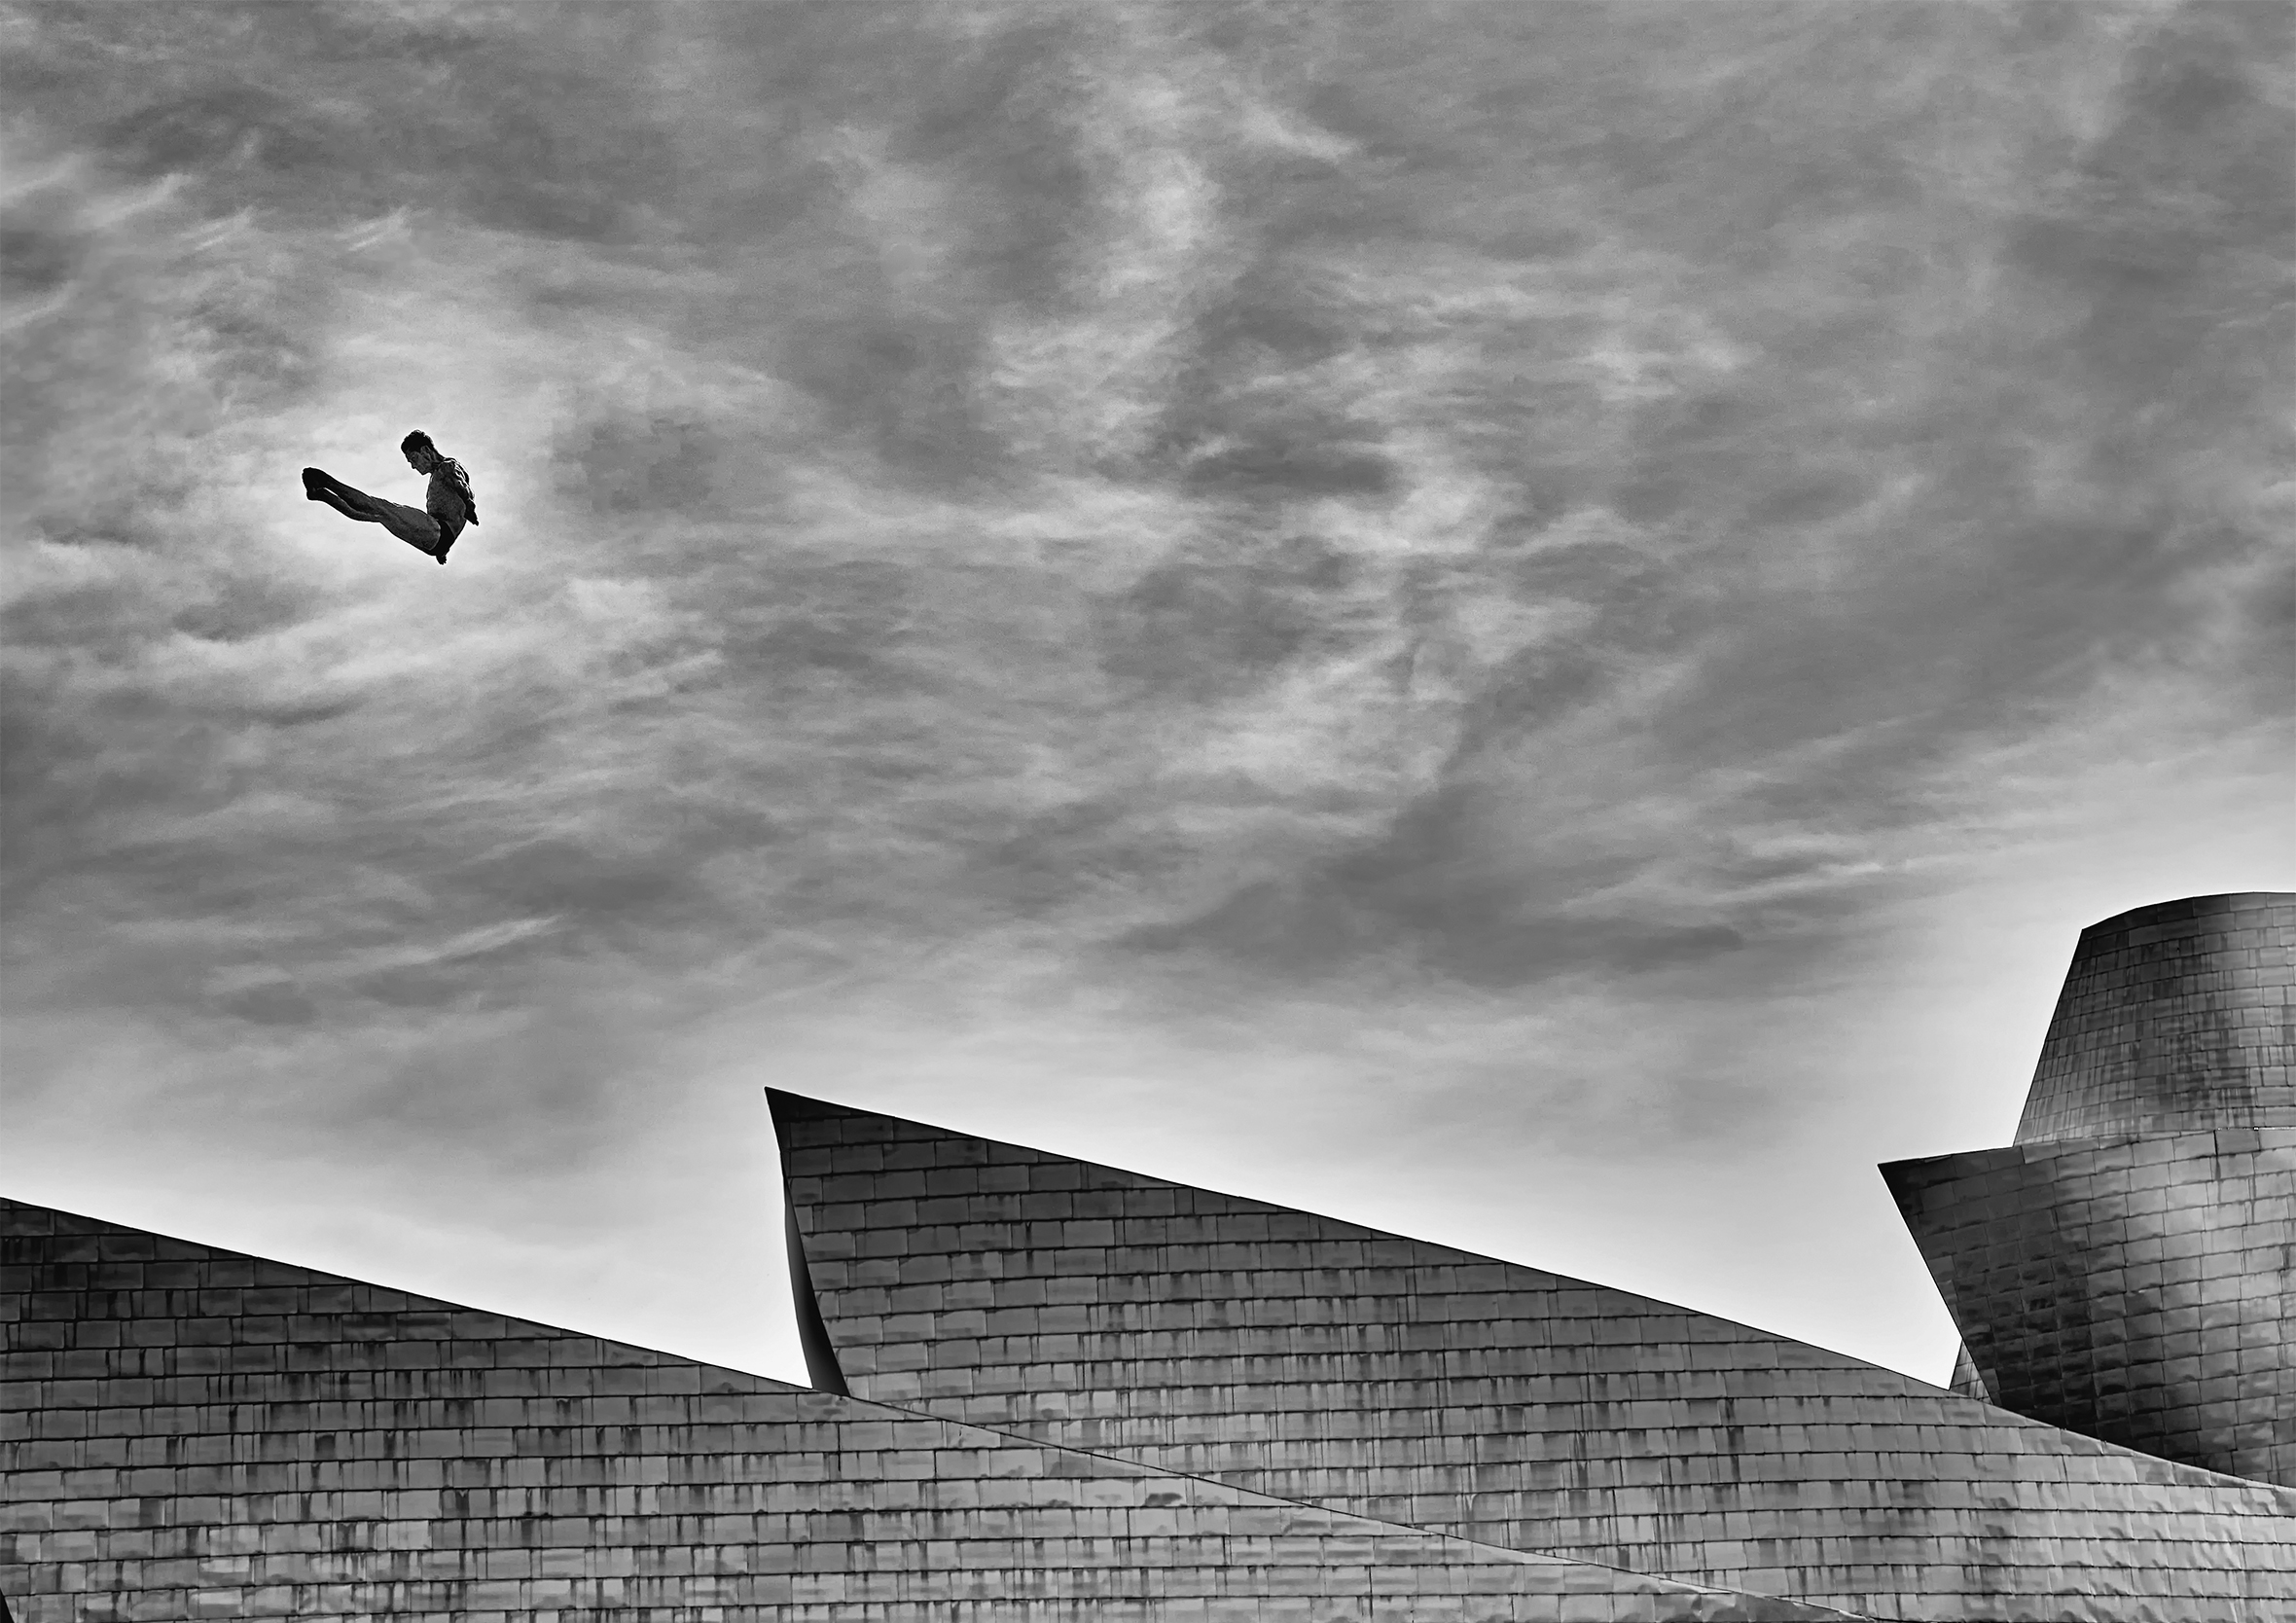 The top part of three angular roofs staggered behind each other against a backdrop of swirling clouds. In a small bright spot in the sky is a man in a speedo seen mid jackknife dive. He is rotated so that his toes are pointed up to the right.